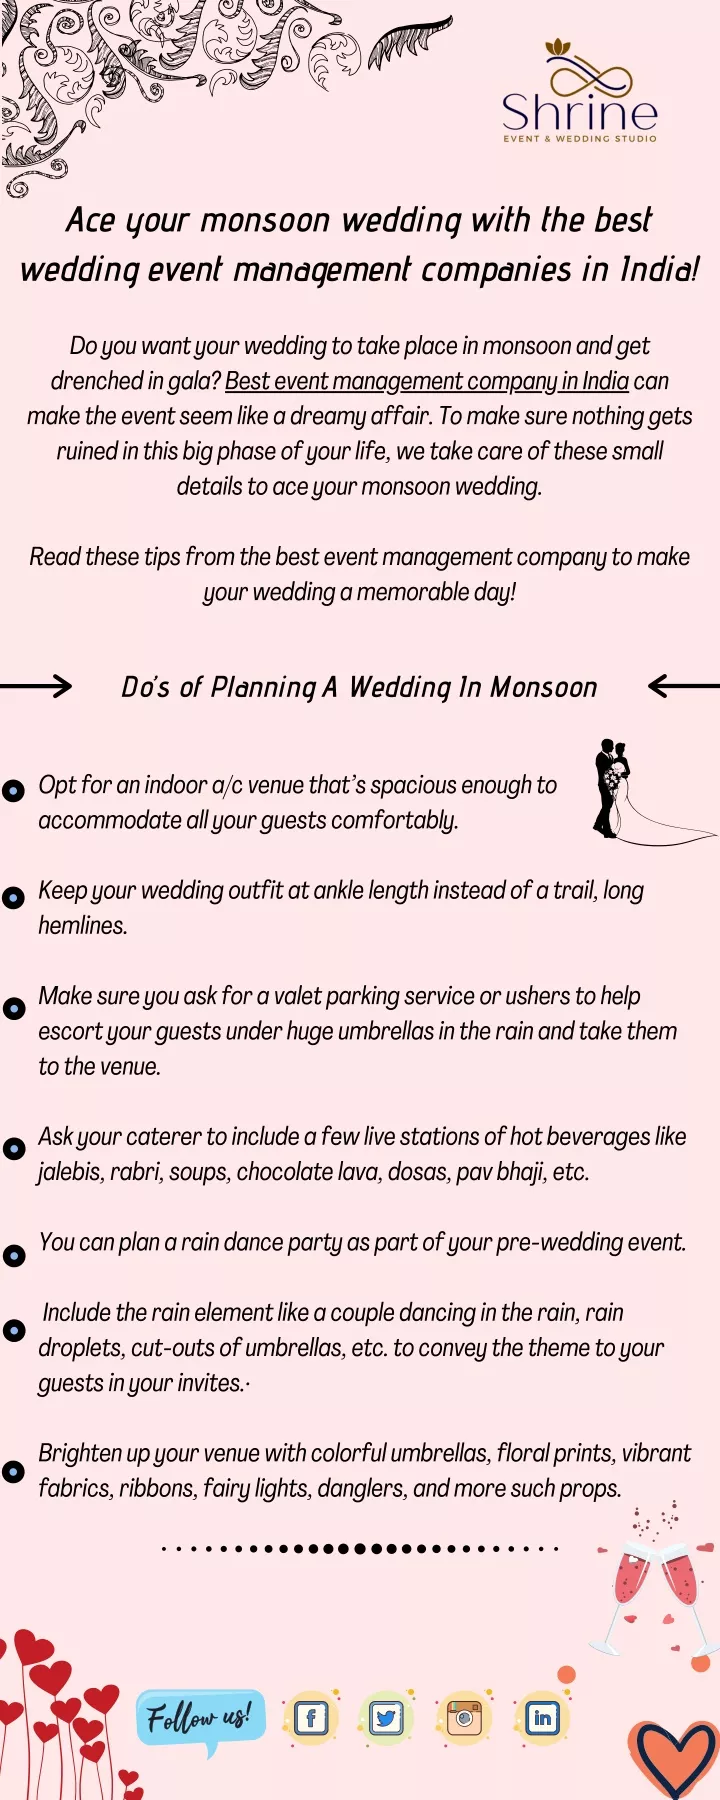 ace your monsoon wedding with the best wedding